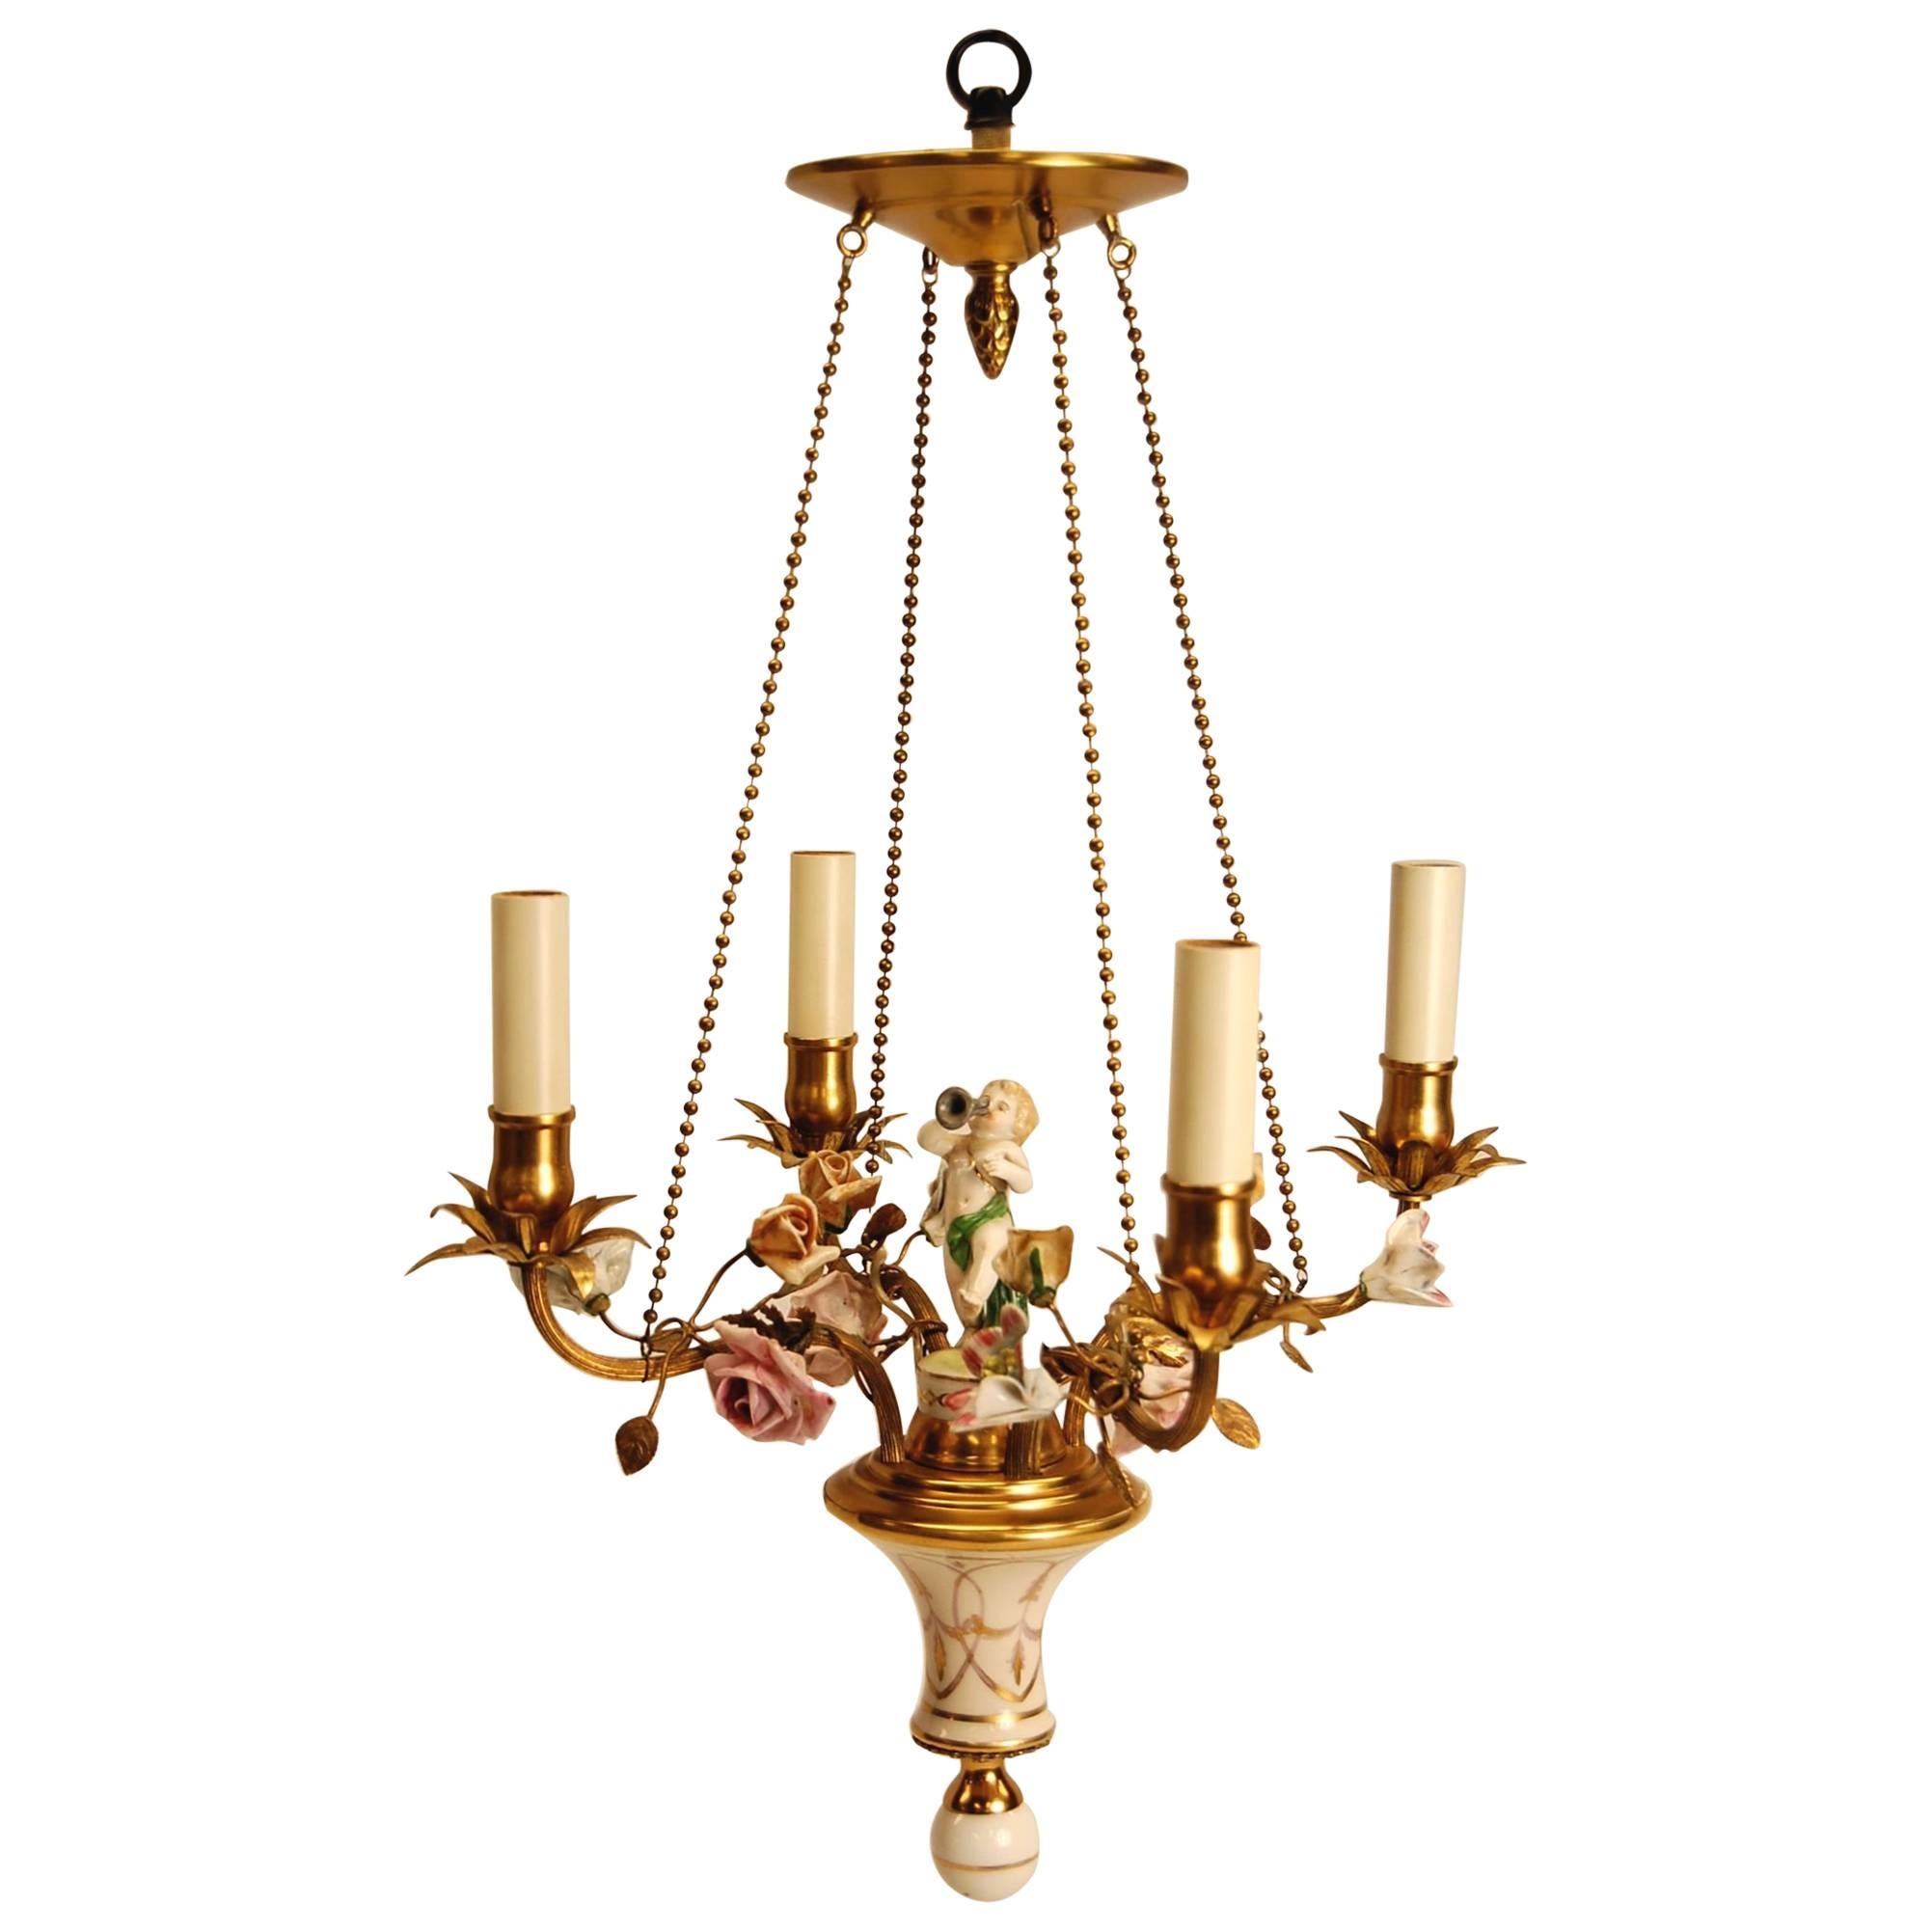 French Gilt Metal Chandelier with Hand-Painted Flowers, Early 20th Century